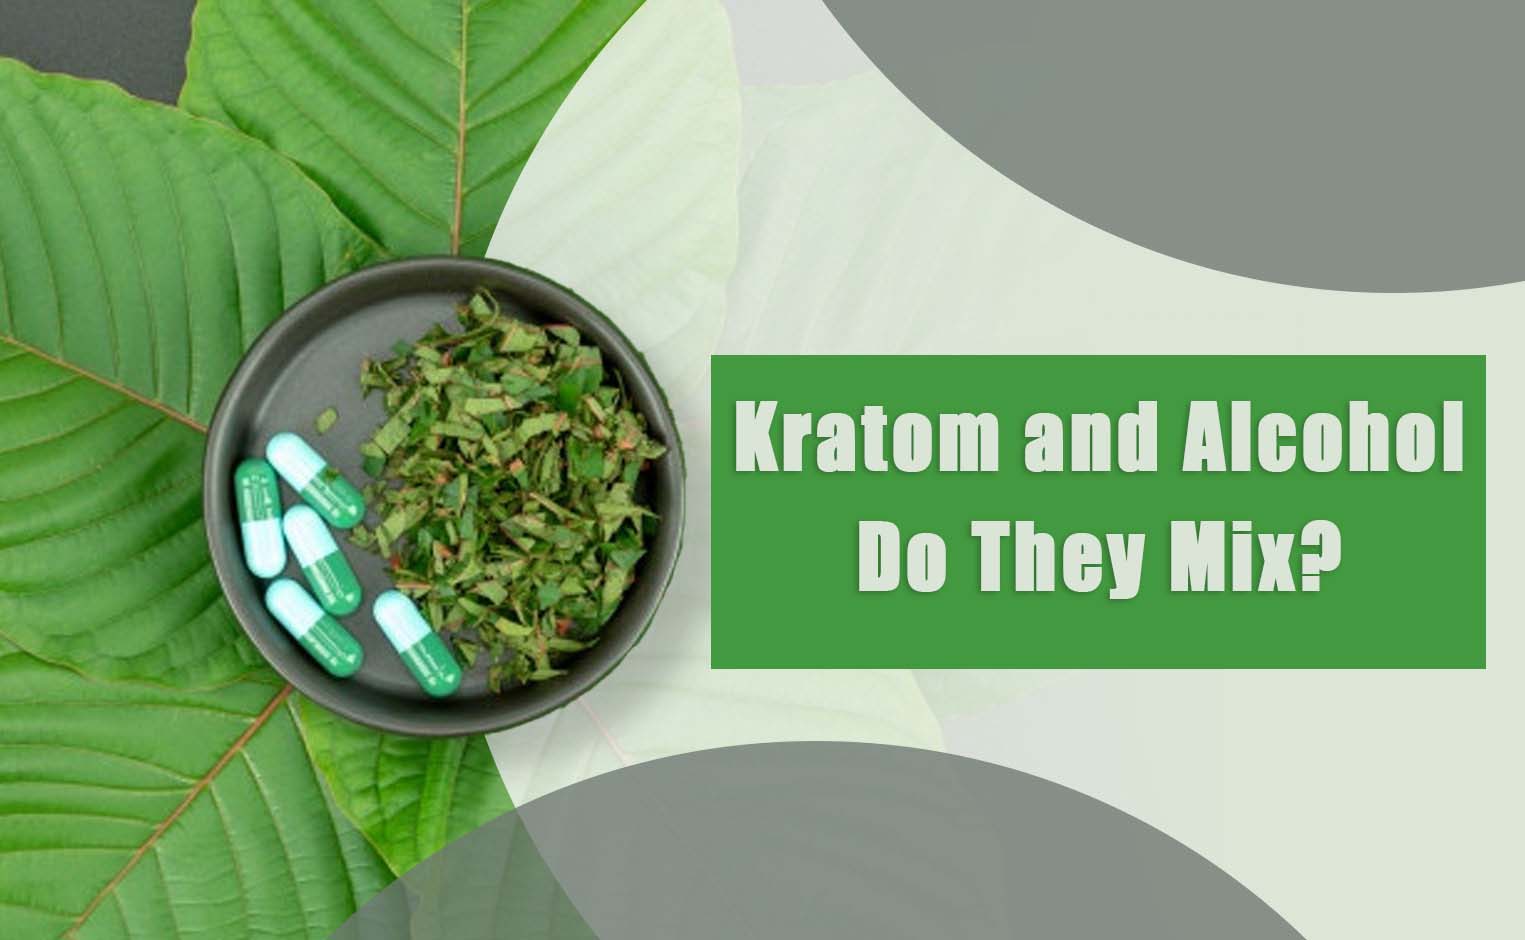 Kratom and Alcohol